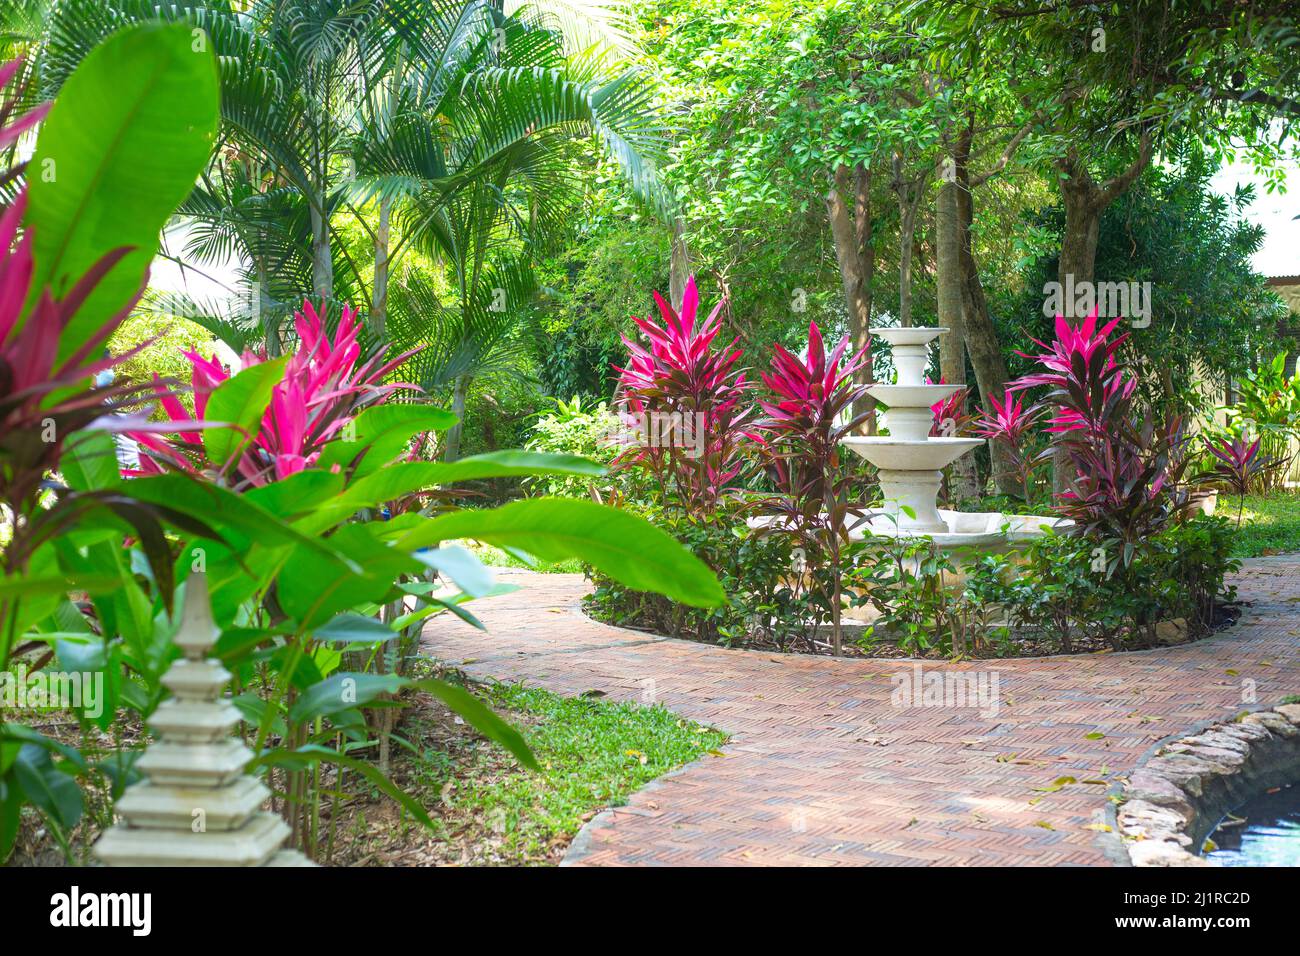 Tropical park with flowers and trees, paths and sculptures. Landscape design of the site. Stock Photo